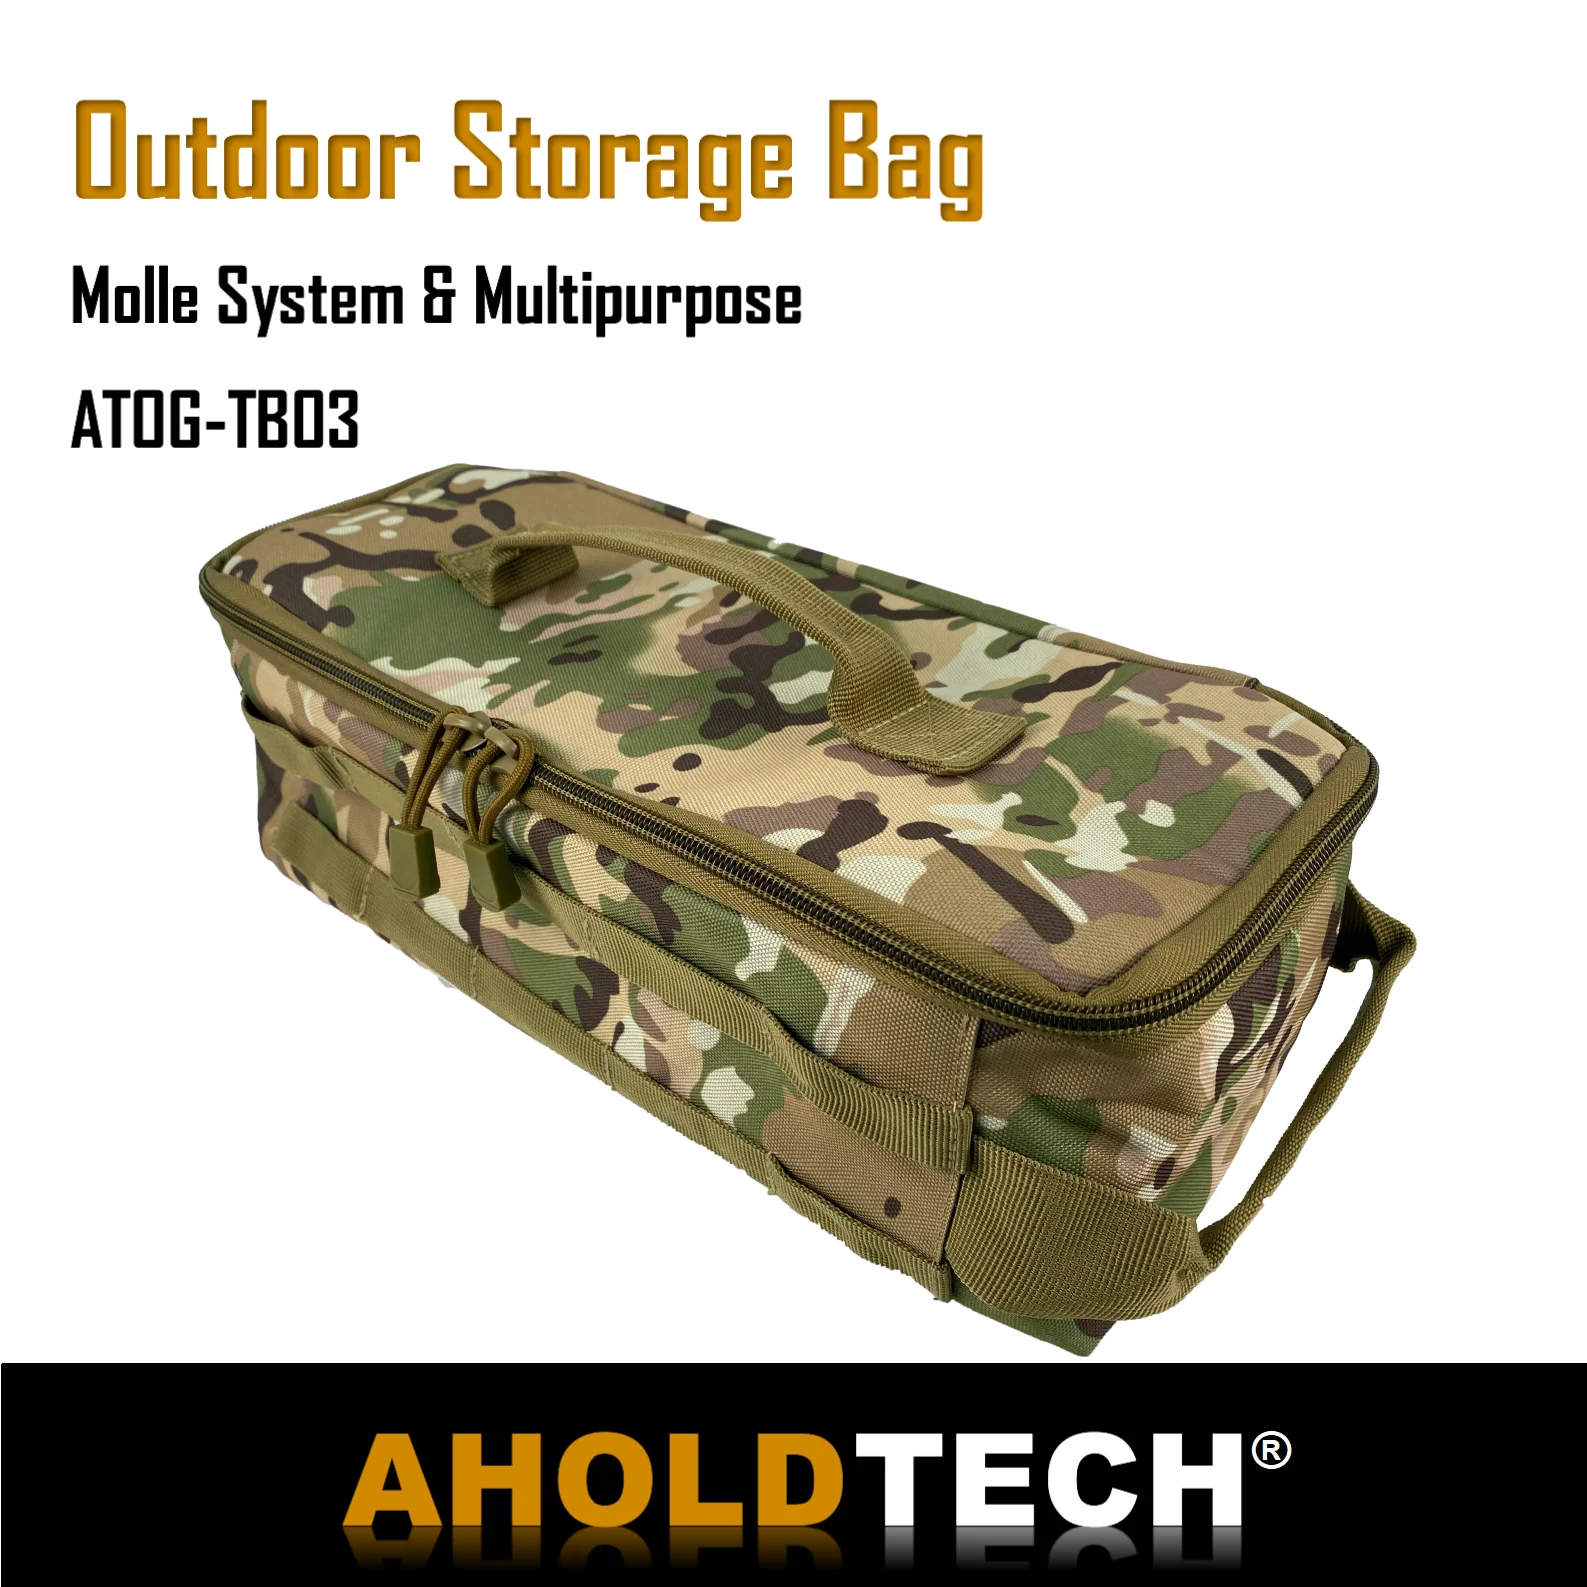 

Aholdtech Tactical Molle Camping Storage HandBag Backpack Accessory bag Travel Outdoor hiking Sports Hunting Shoulder Luggage